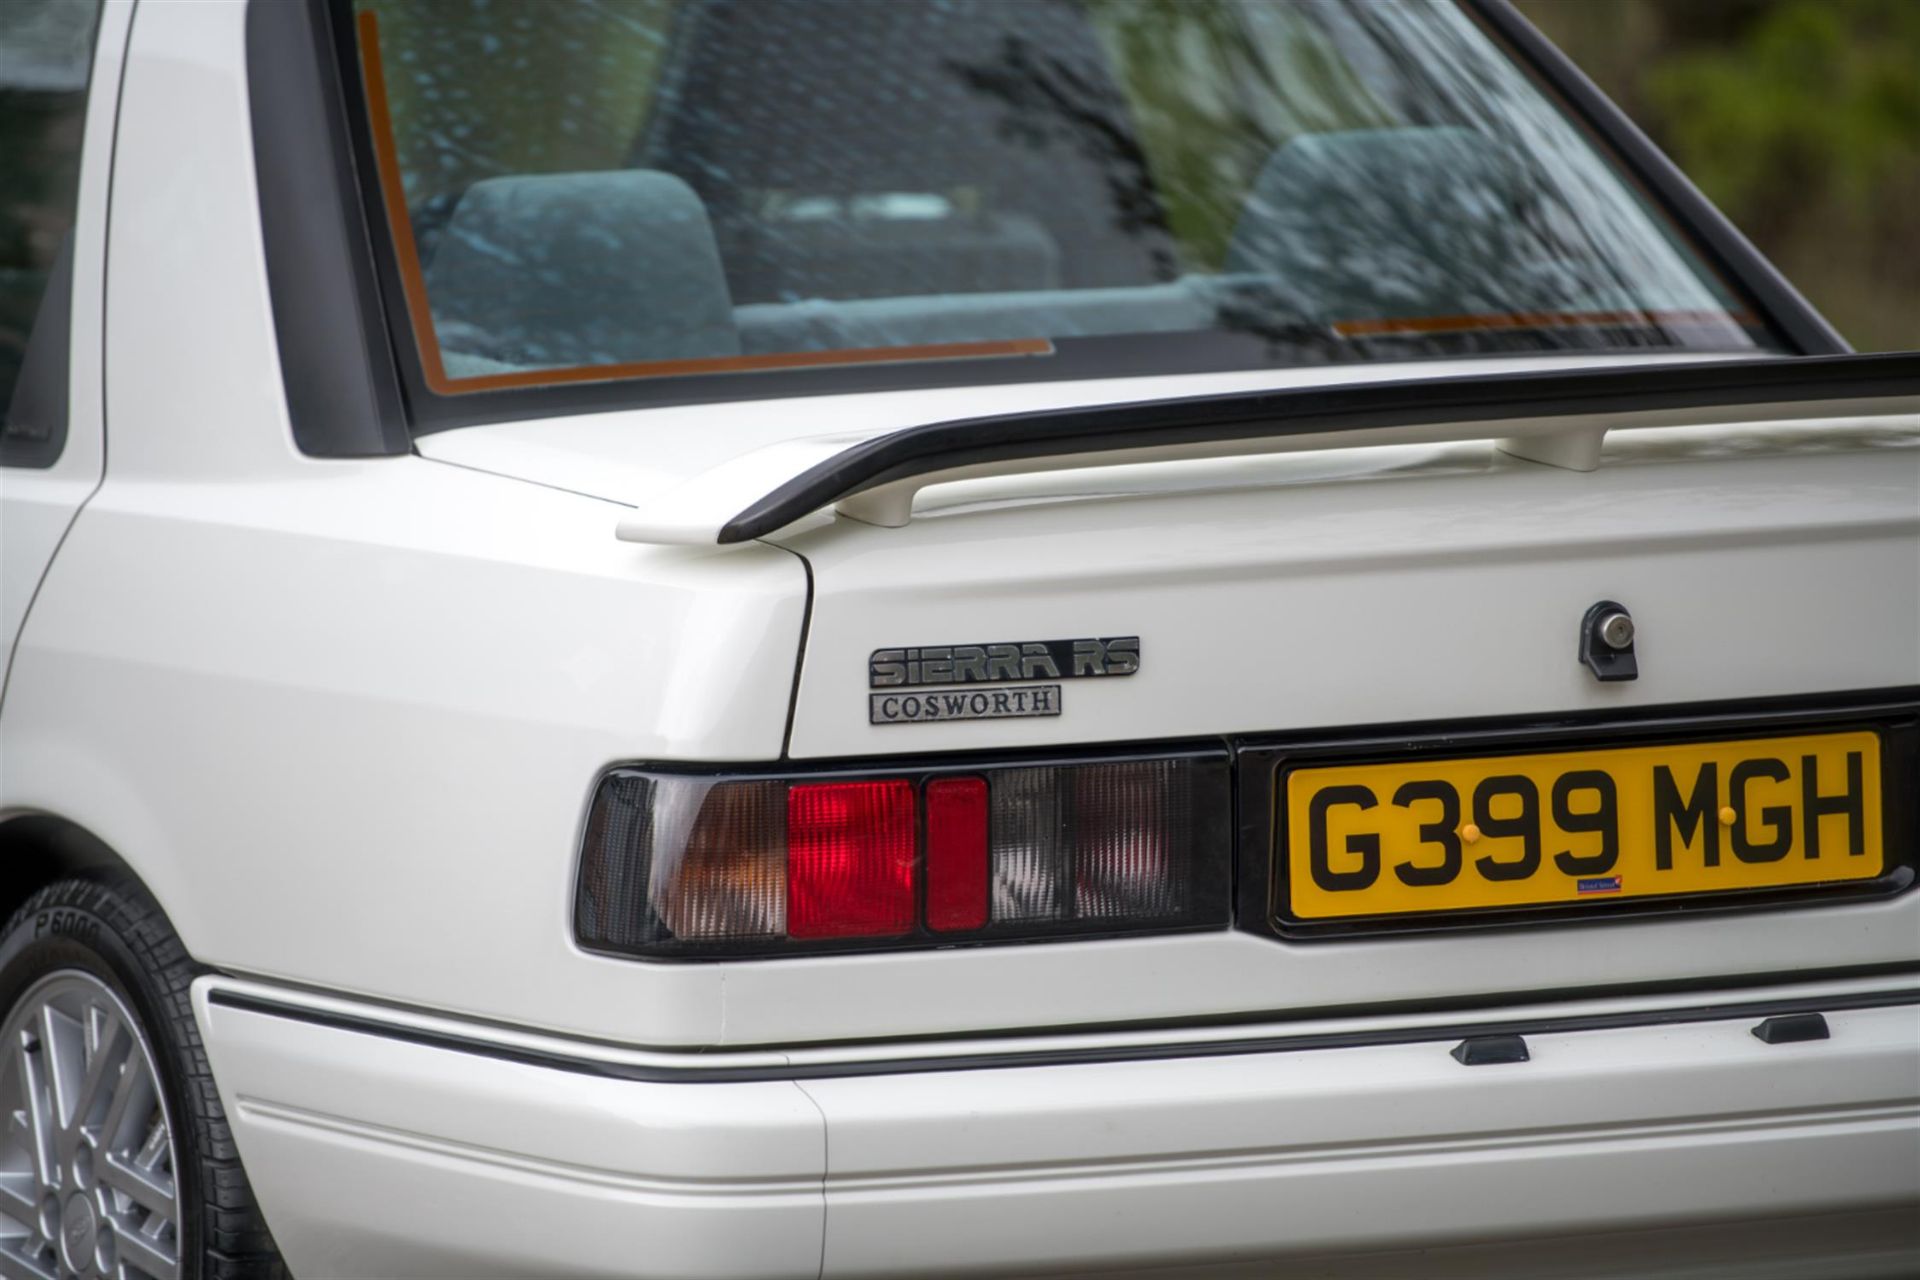 1989 Ford Sierra Sapphire RS Cosworth (2WD) - Image 10 of 10